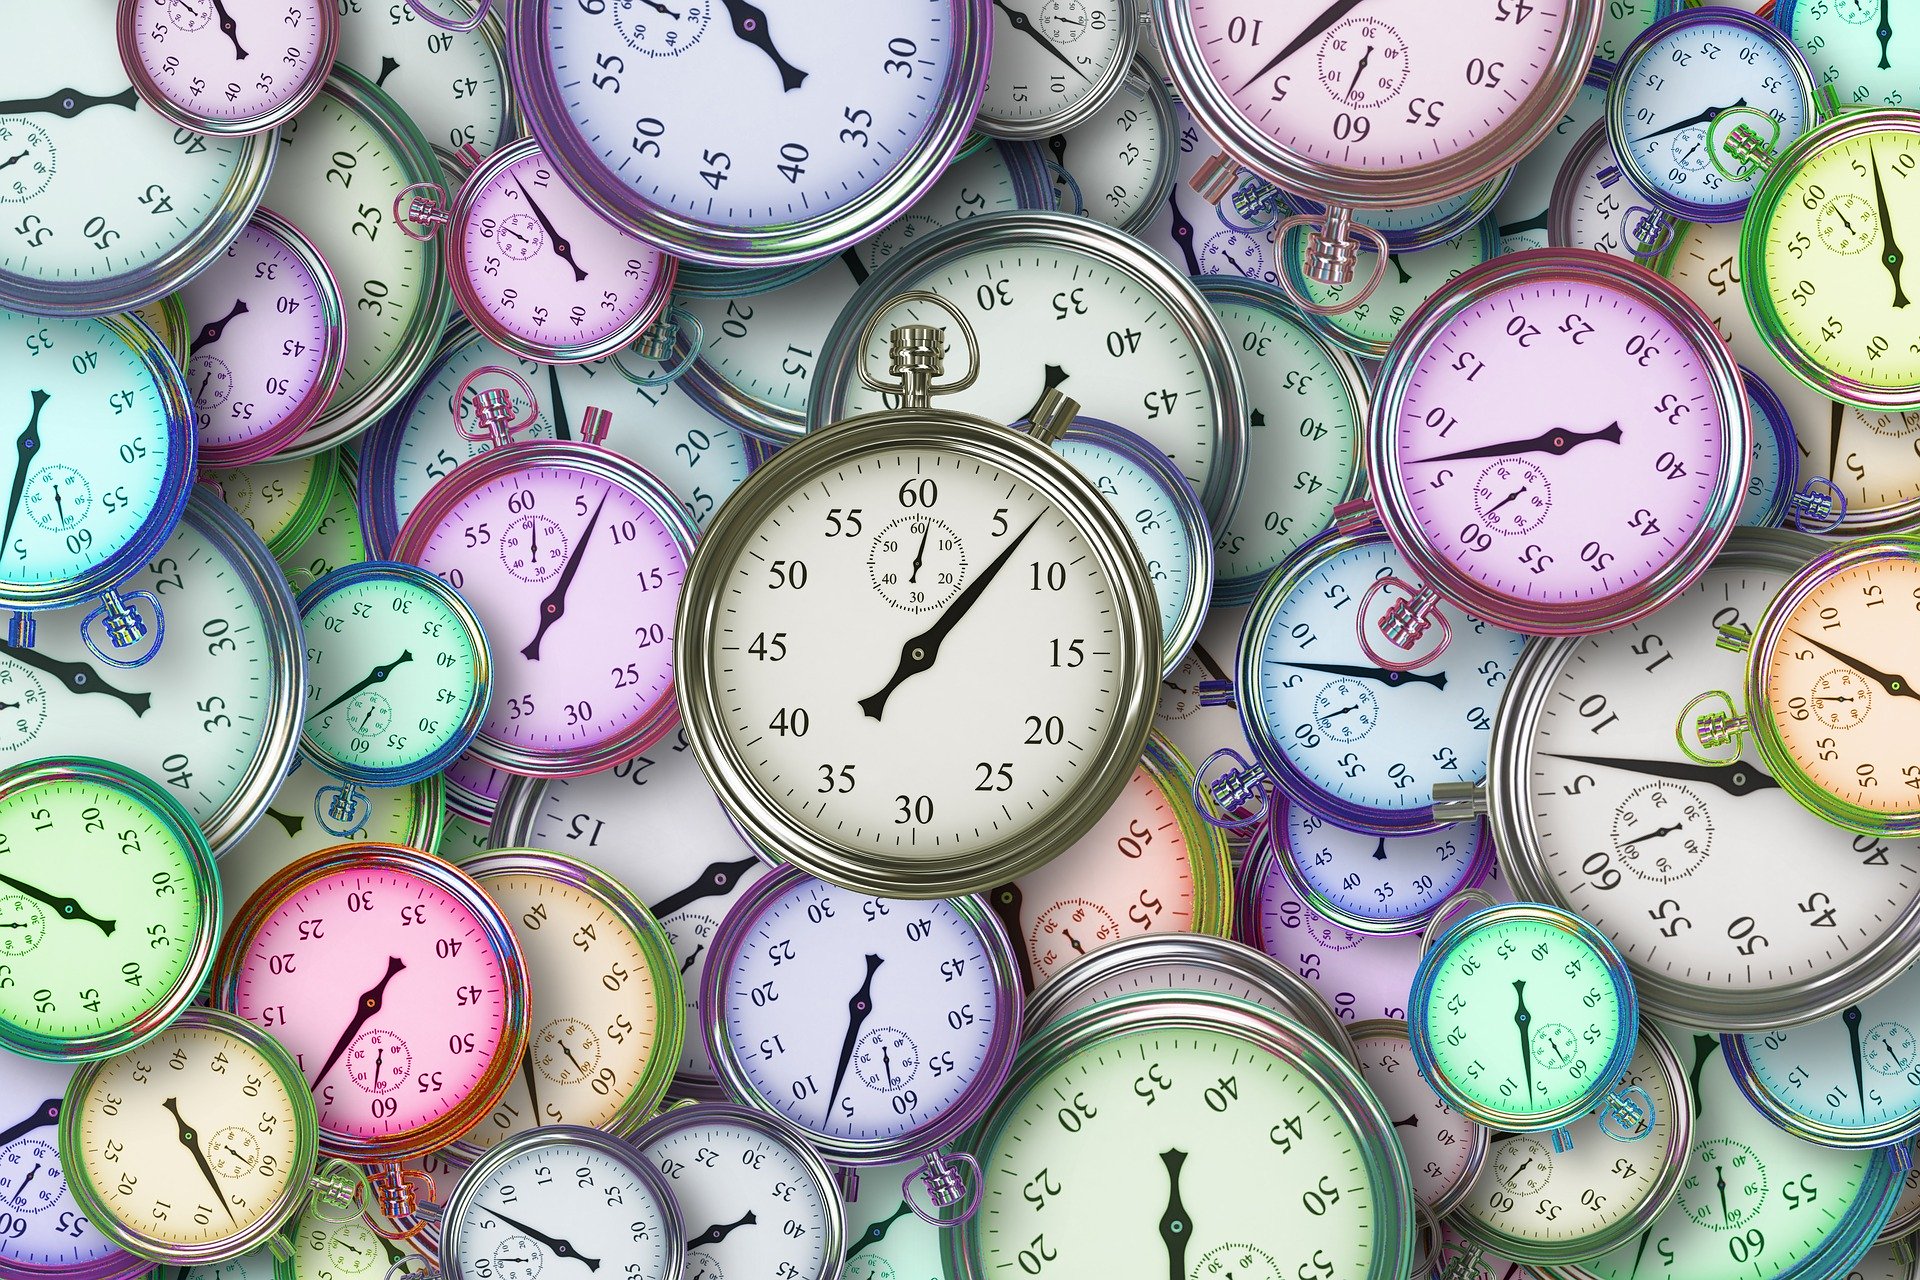 5 Tips to Help Struggling Learners by Using Time Goals